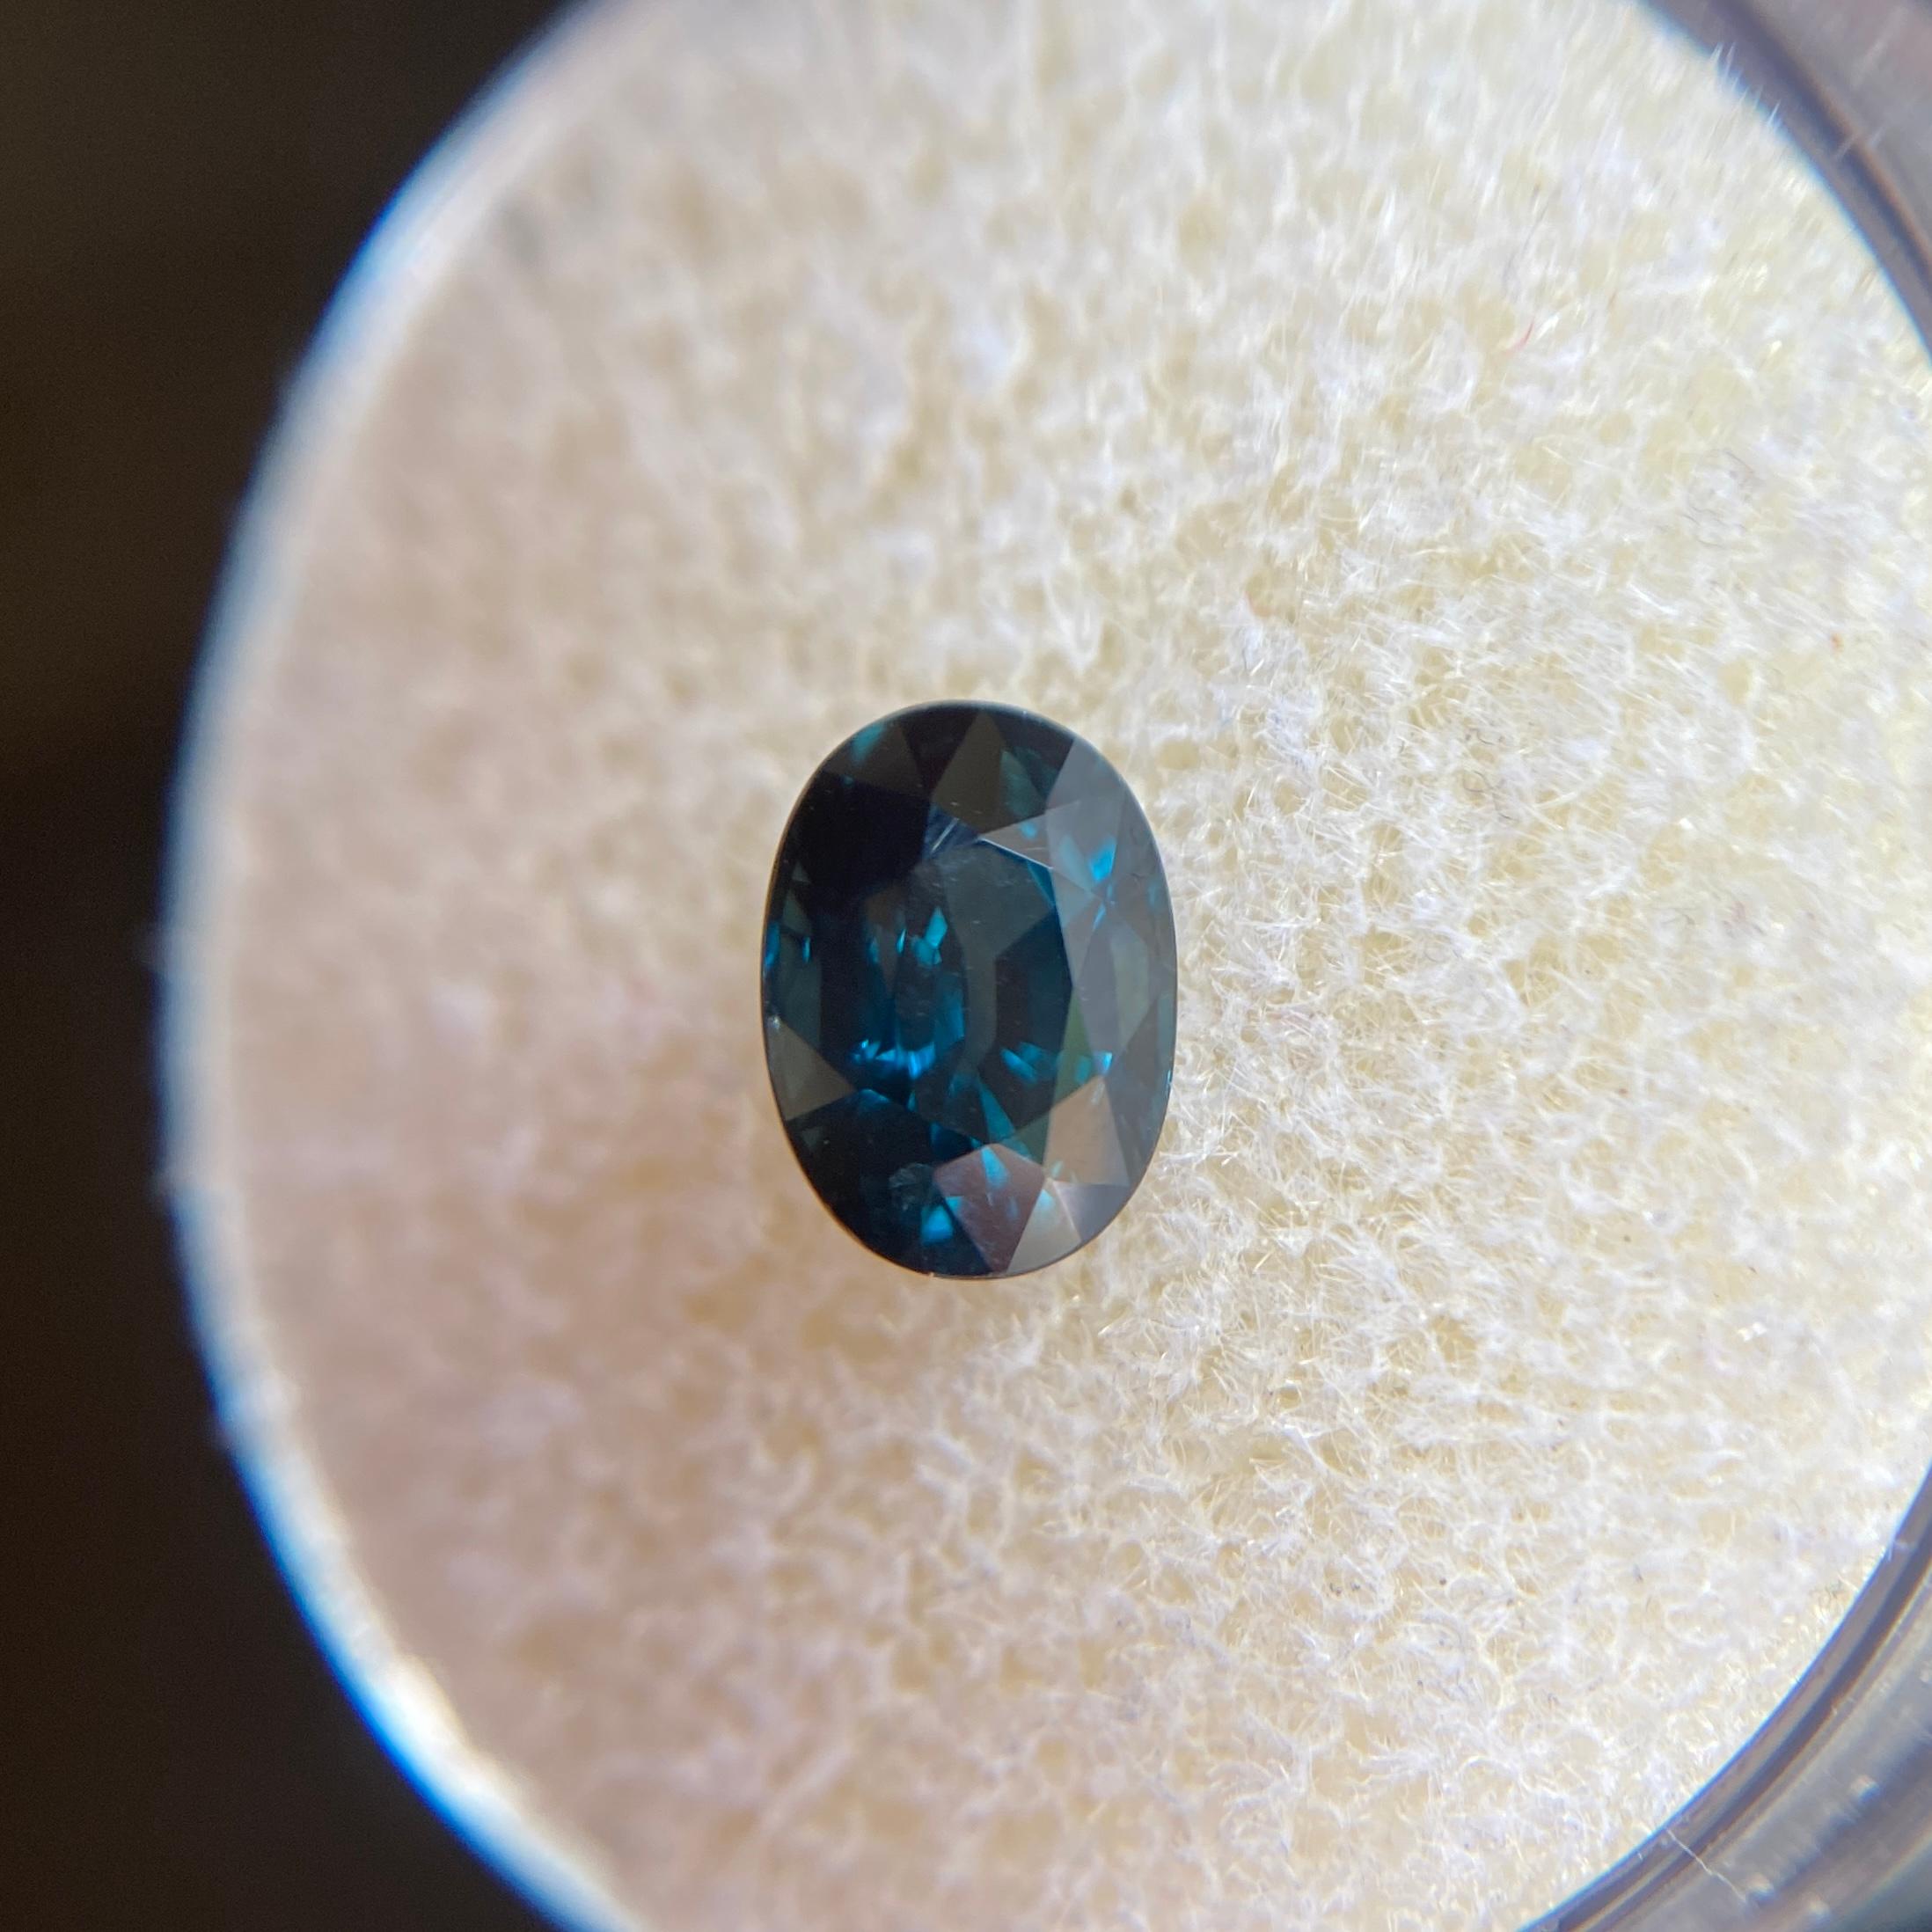 Fine Natural Blueish Green ‘Teal’ Sapphire Gemstone.

1.33 Carat with a beautiful and unique blueish green colour and excellent clarity, a very clean stone with only some small natural inclusions visible when looking closely.

Also has an excellent